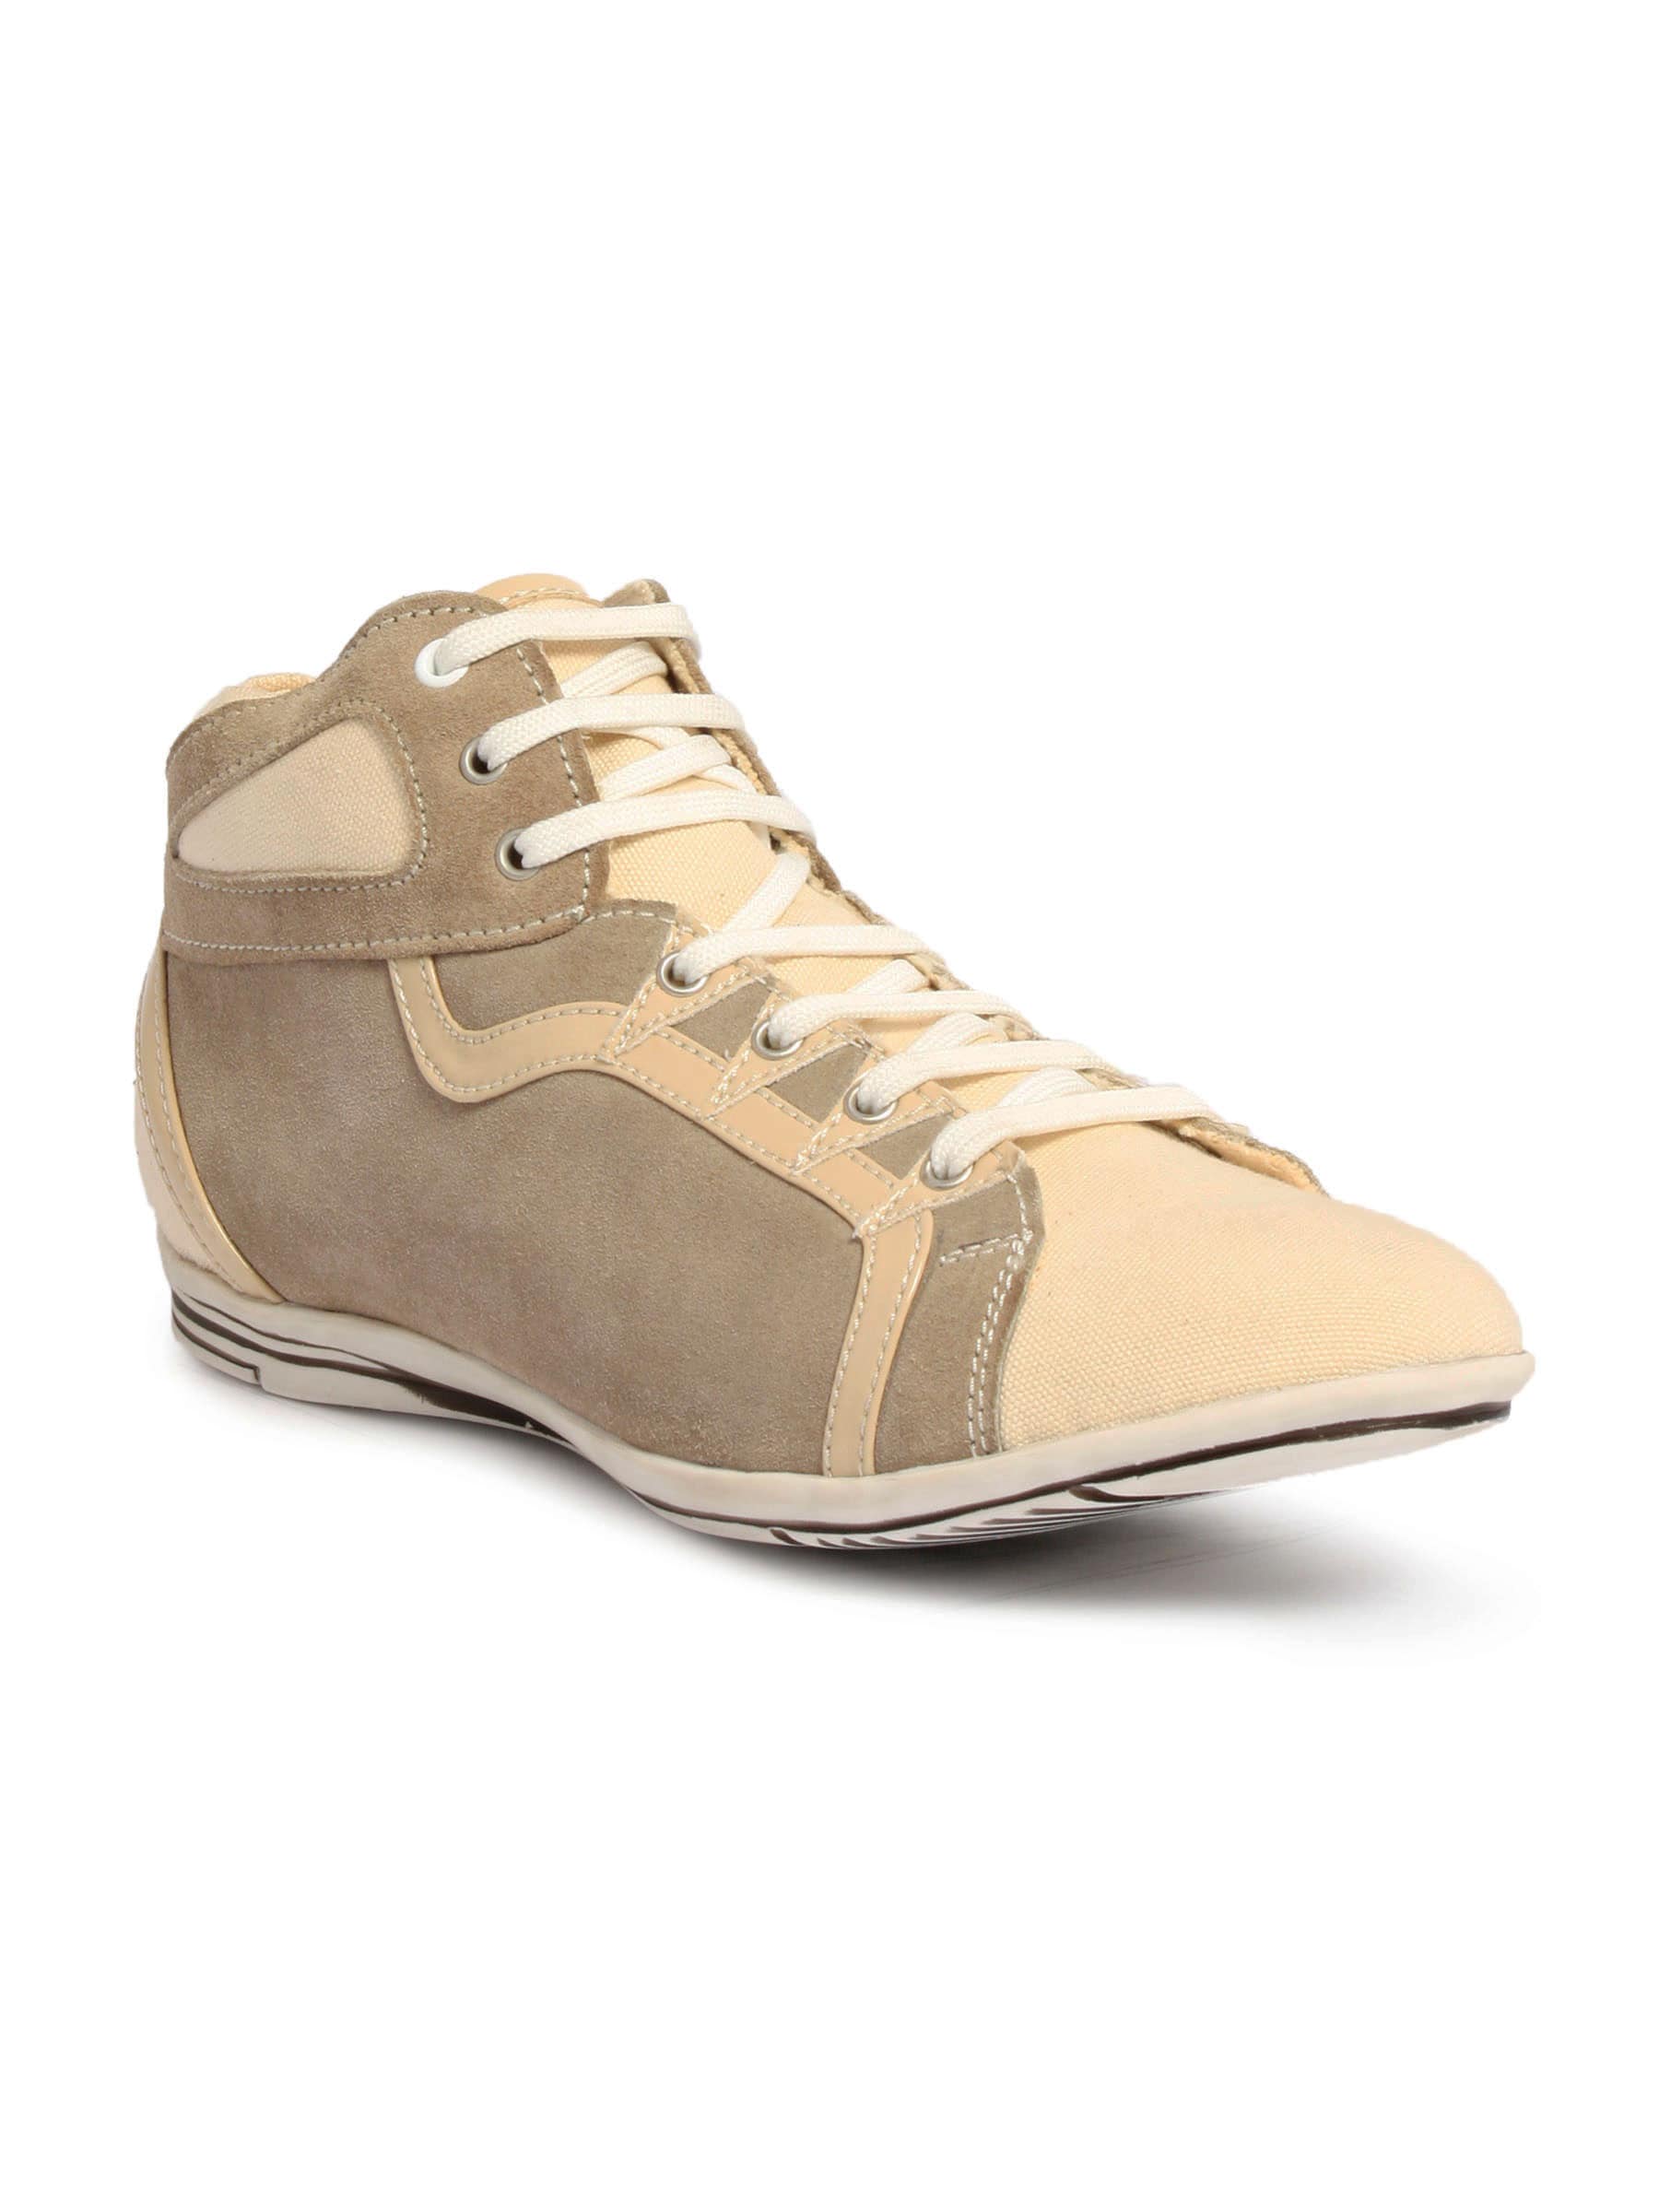 Flying Machine Men Casual Beige Casual Shoes